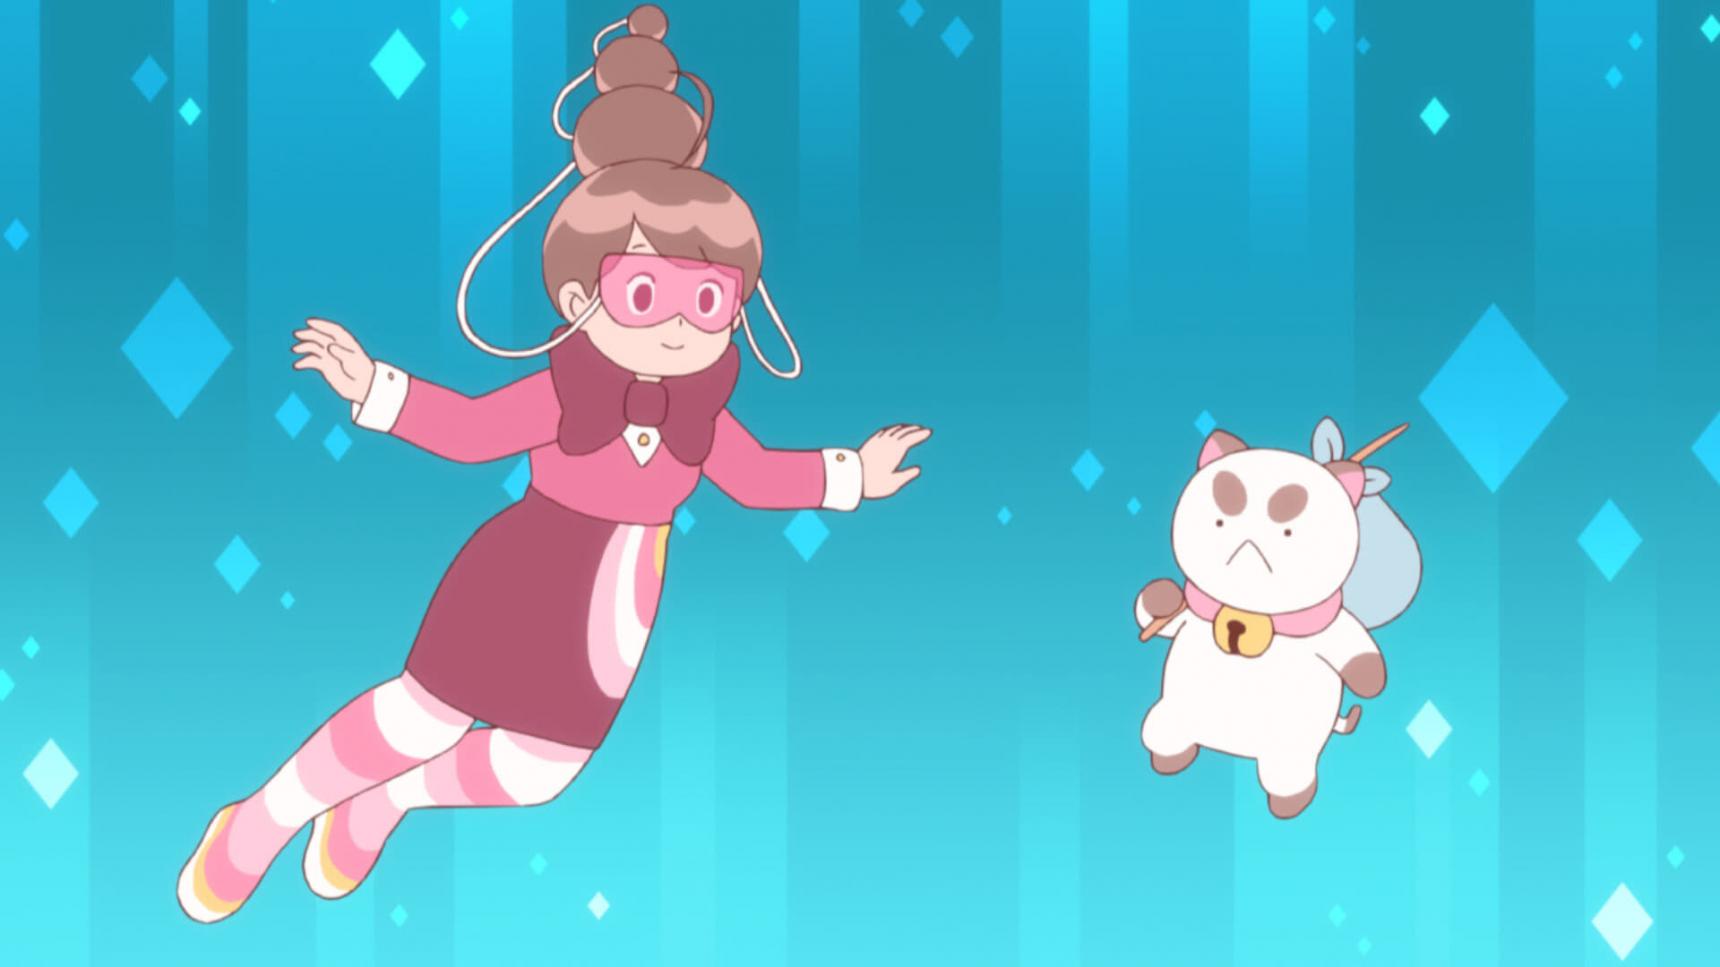 Poster del episodio 9 de Bee and PuppyCat: Lazy in Space online